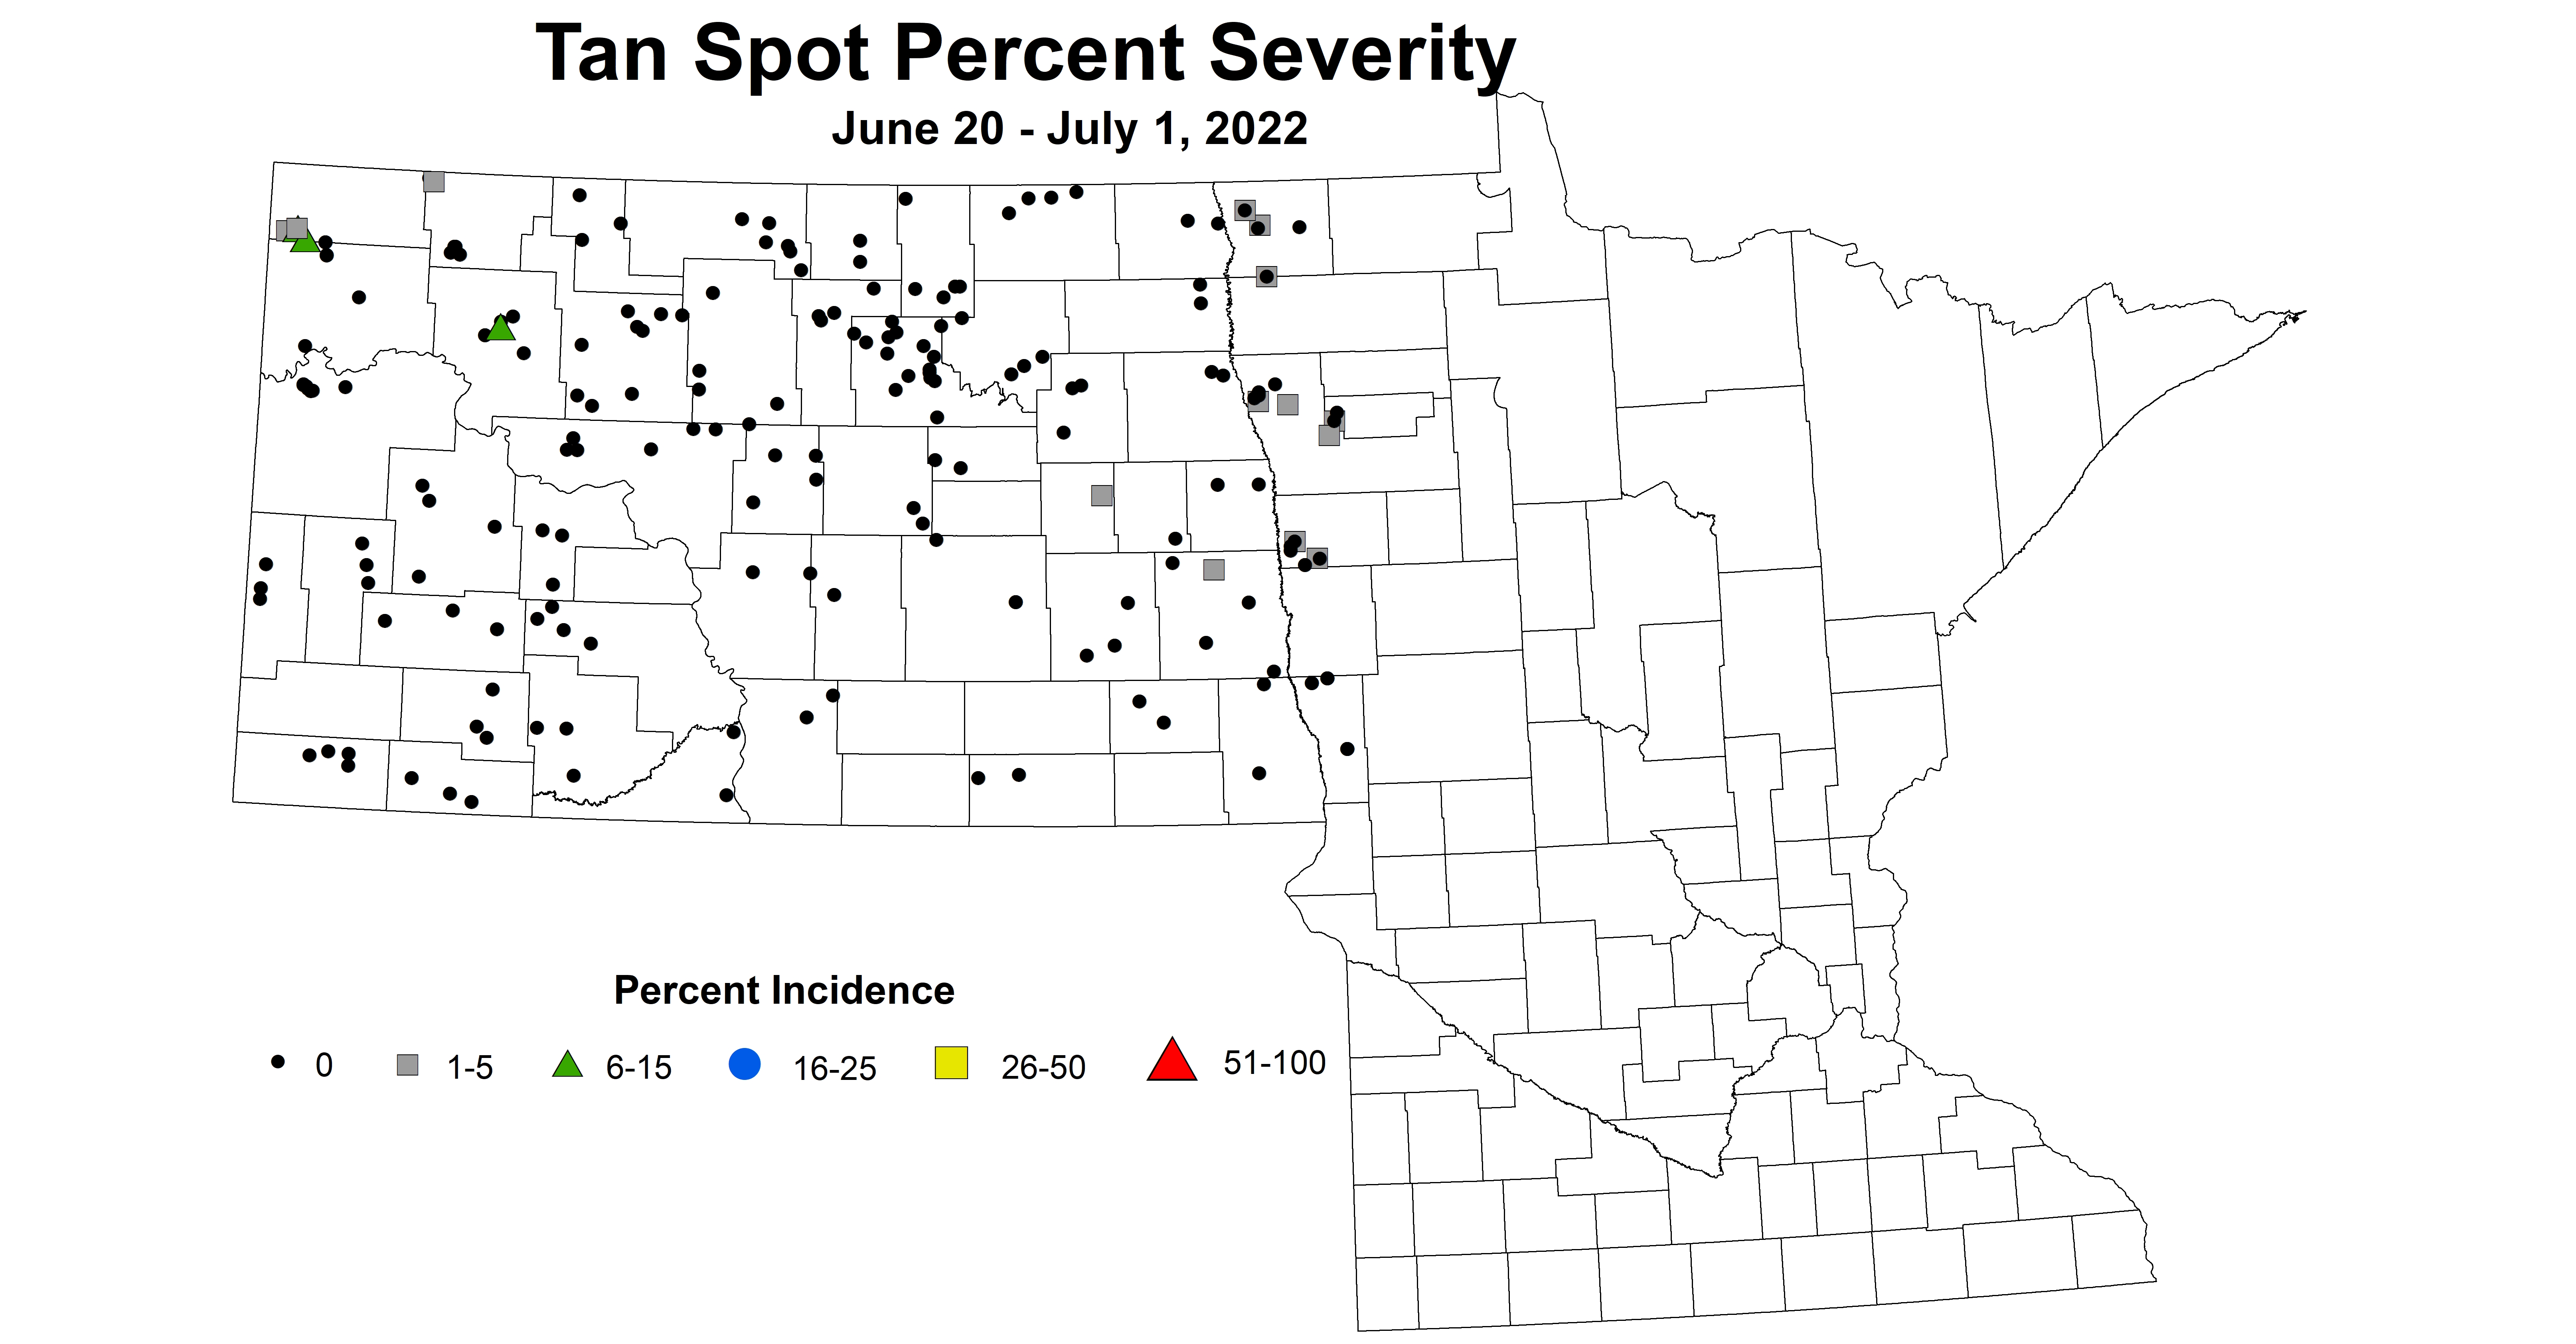 ND IPM map of wheat tan spot severity June 20 to July 1, 2022